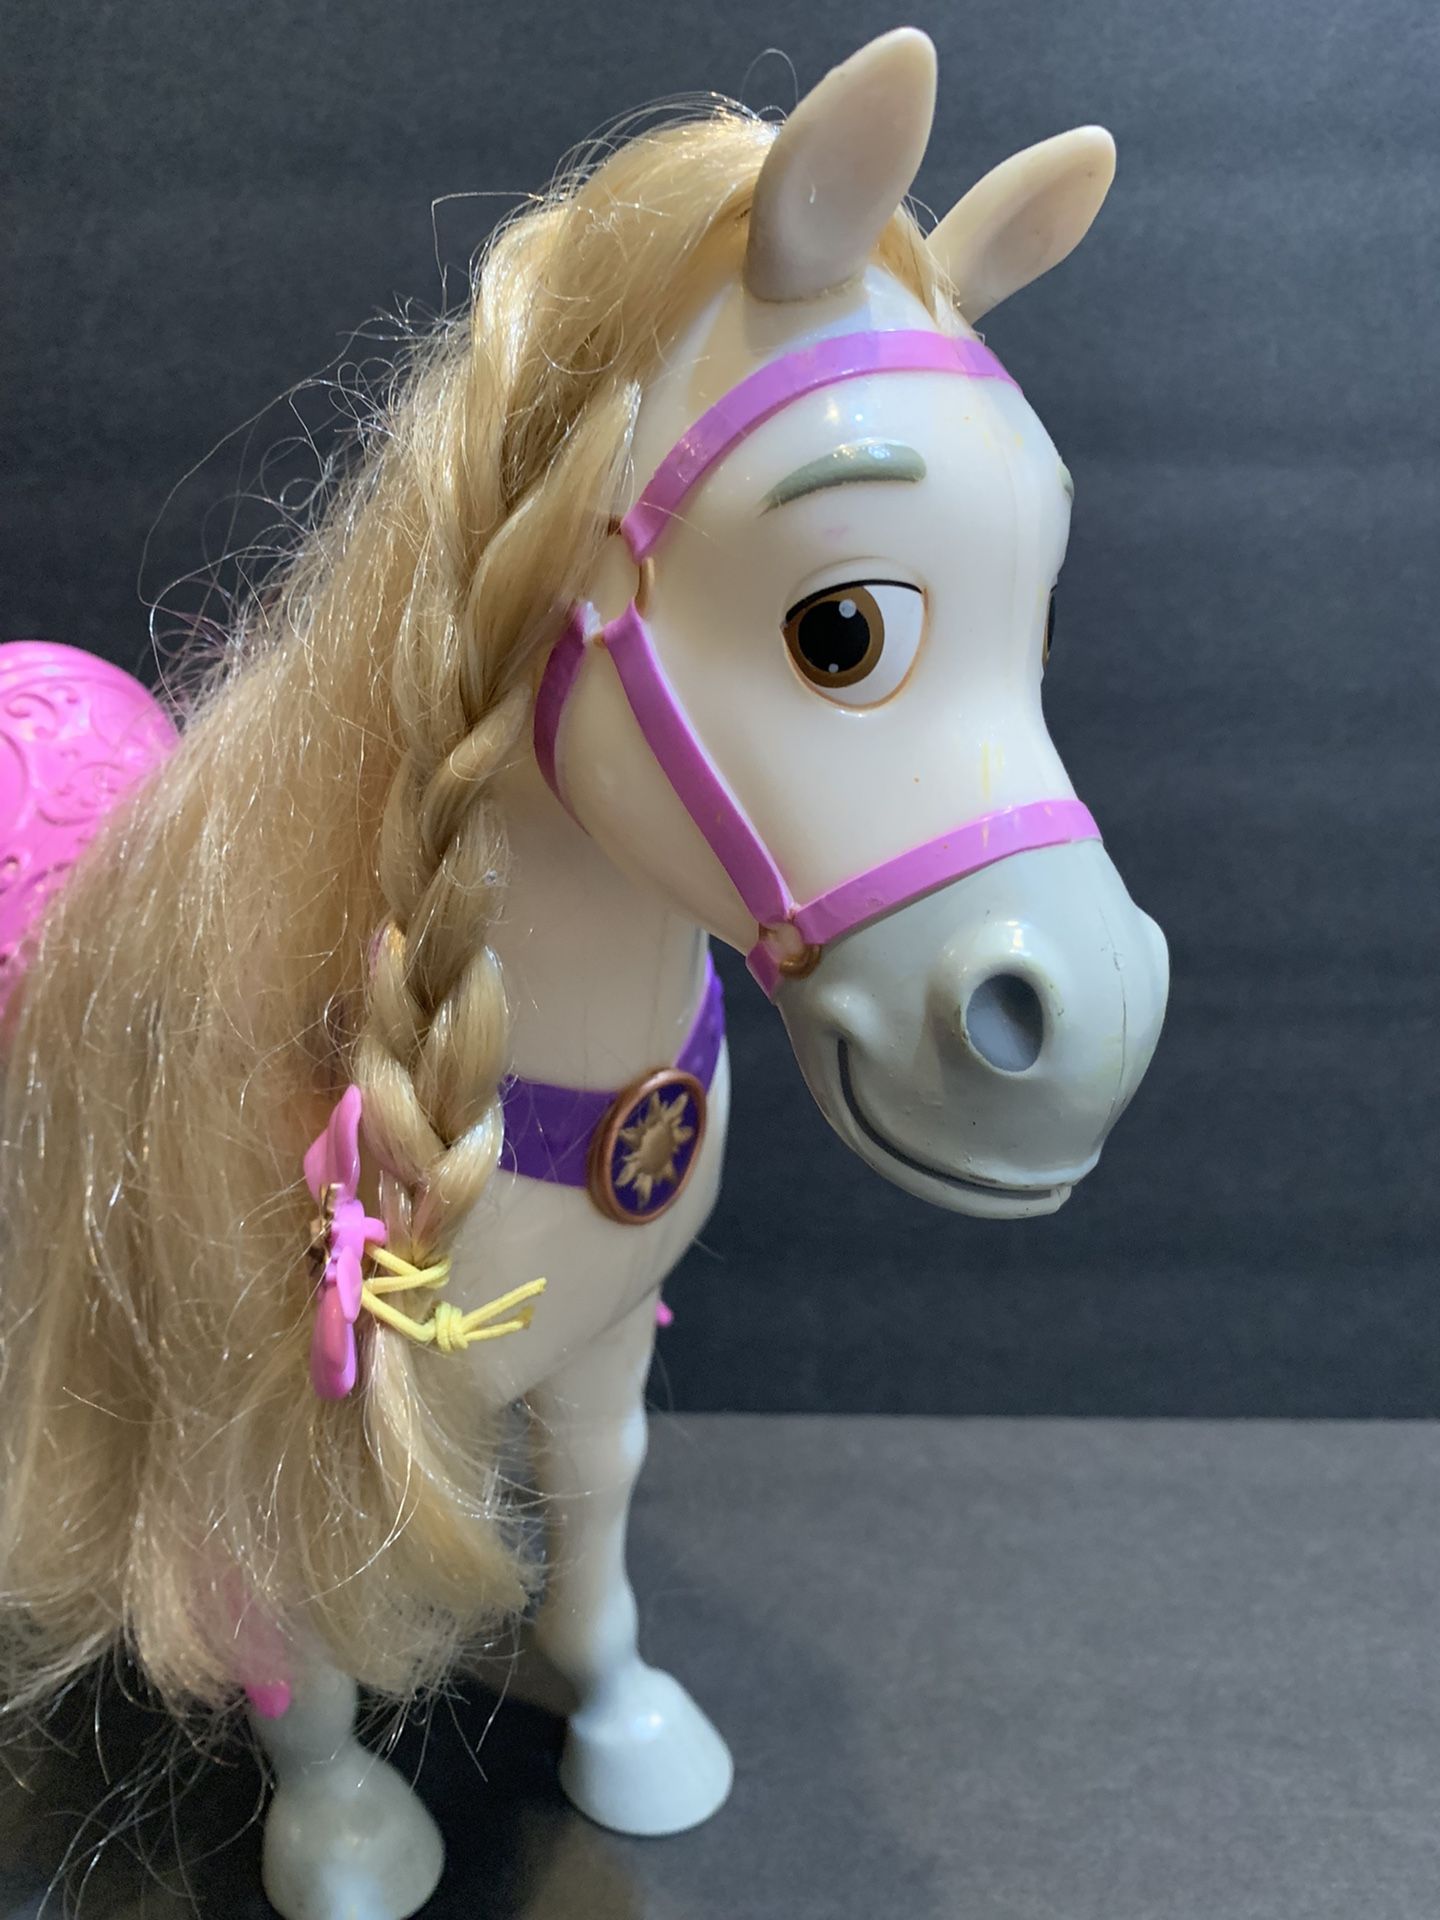 DISNEY MAXIMUS THE  HORSE!  RAPUNZEL’S HORSE!  BEAUTIFUL  12 INCH WITH A NICE MANE! 